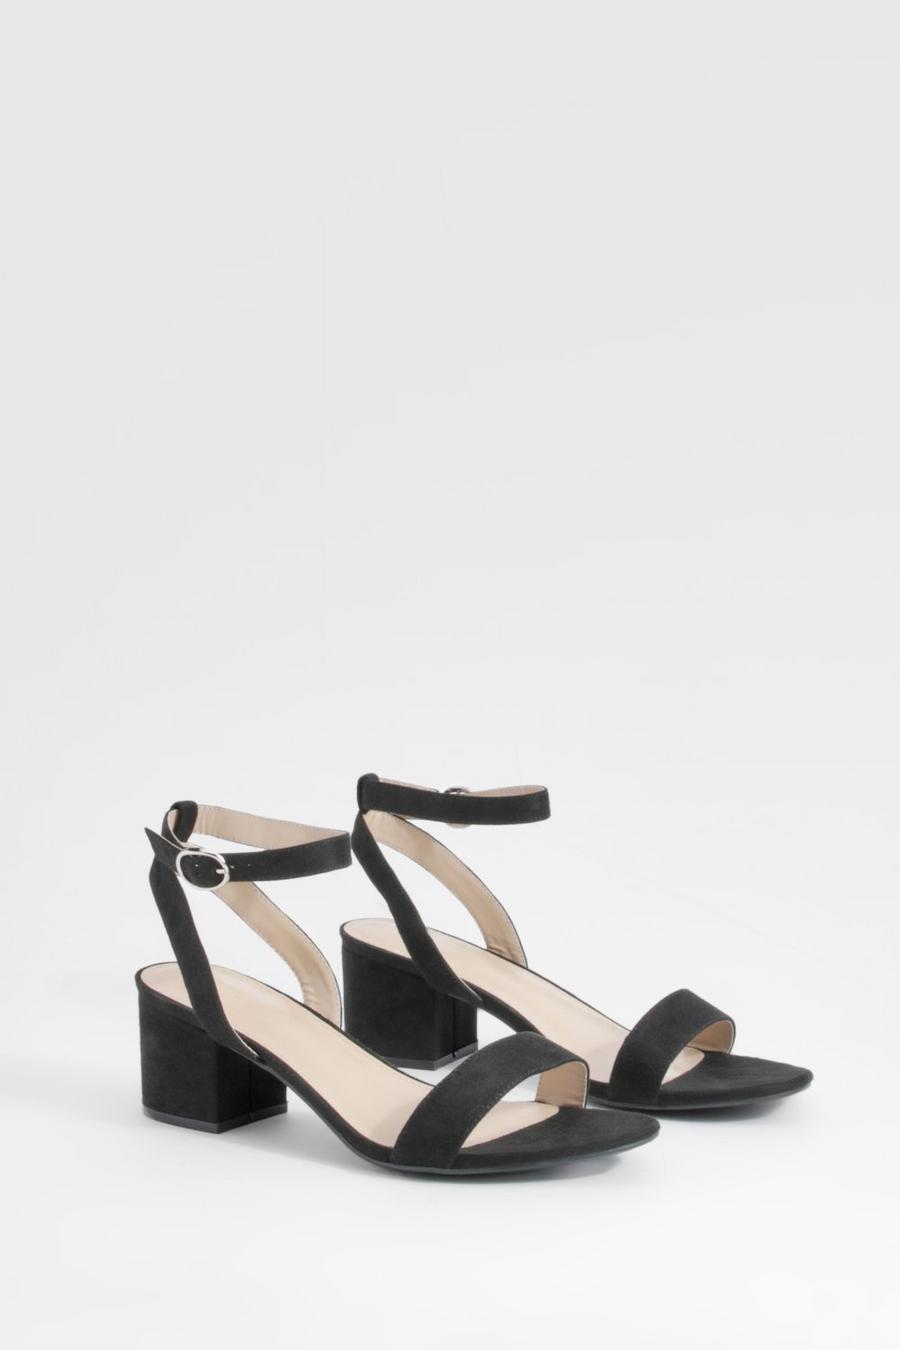 Black Wide Fit Low Block Barely There Heels 